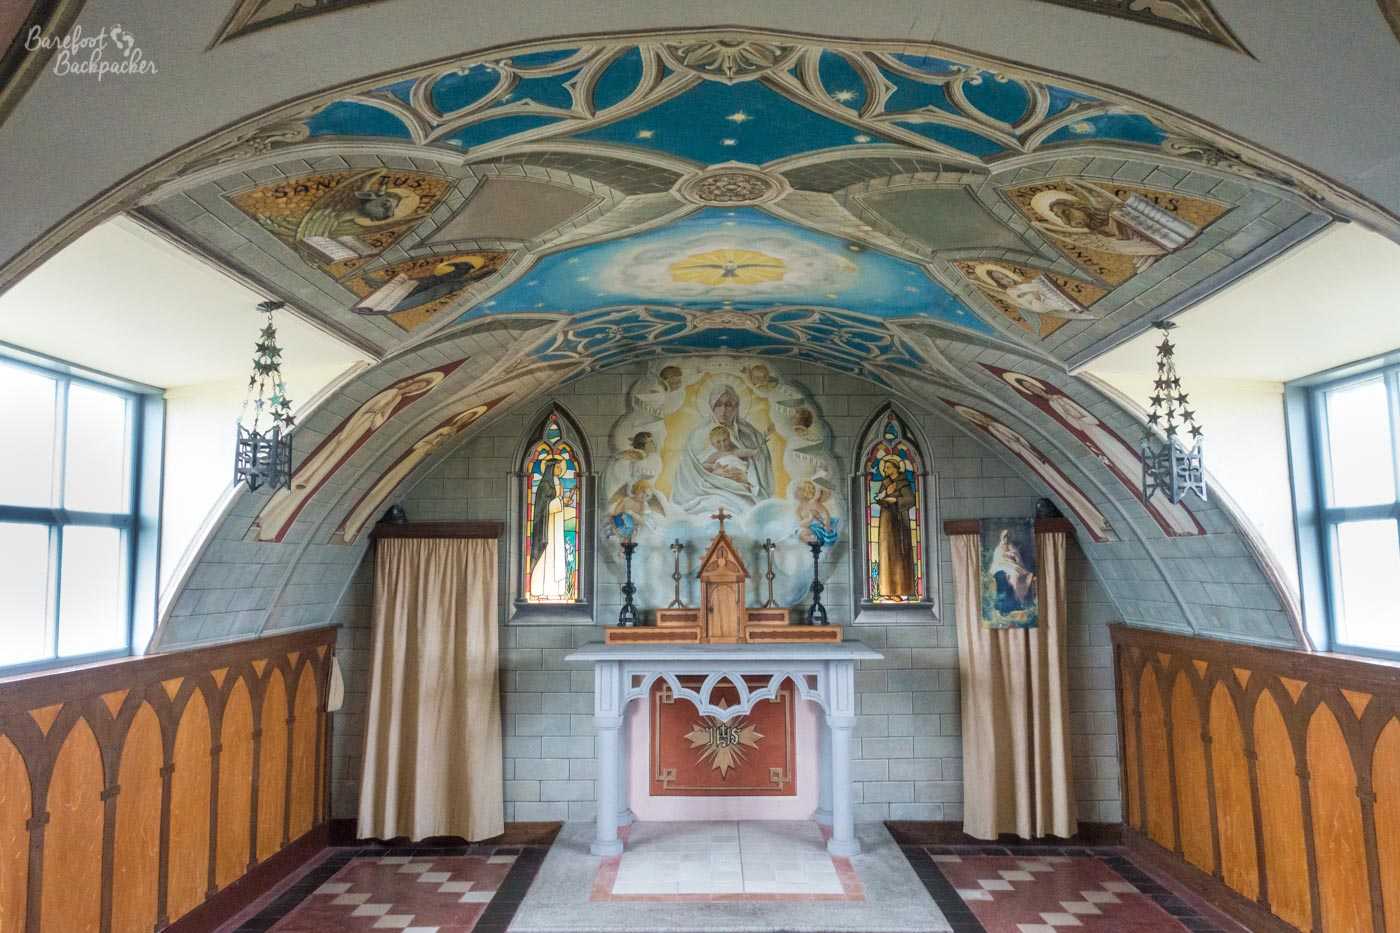 The inside of the Italian Chapel. The décor is mainly sky-blue and orange on white walls, with biblical frescoes on the ceiling and images of Jesus on the walls. In the centre of frame is a white altar with red decorations, also crucifixes and candlesticks, in front of a large Jesus/Mary fresco either side of two small stained glass windows.